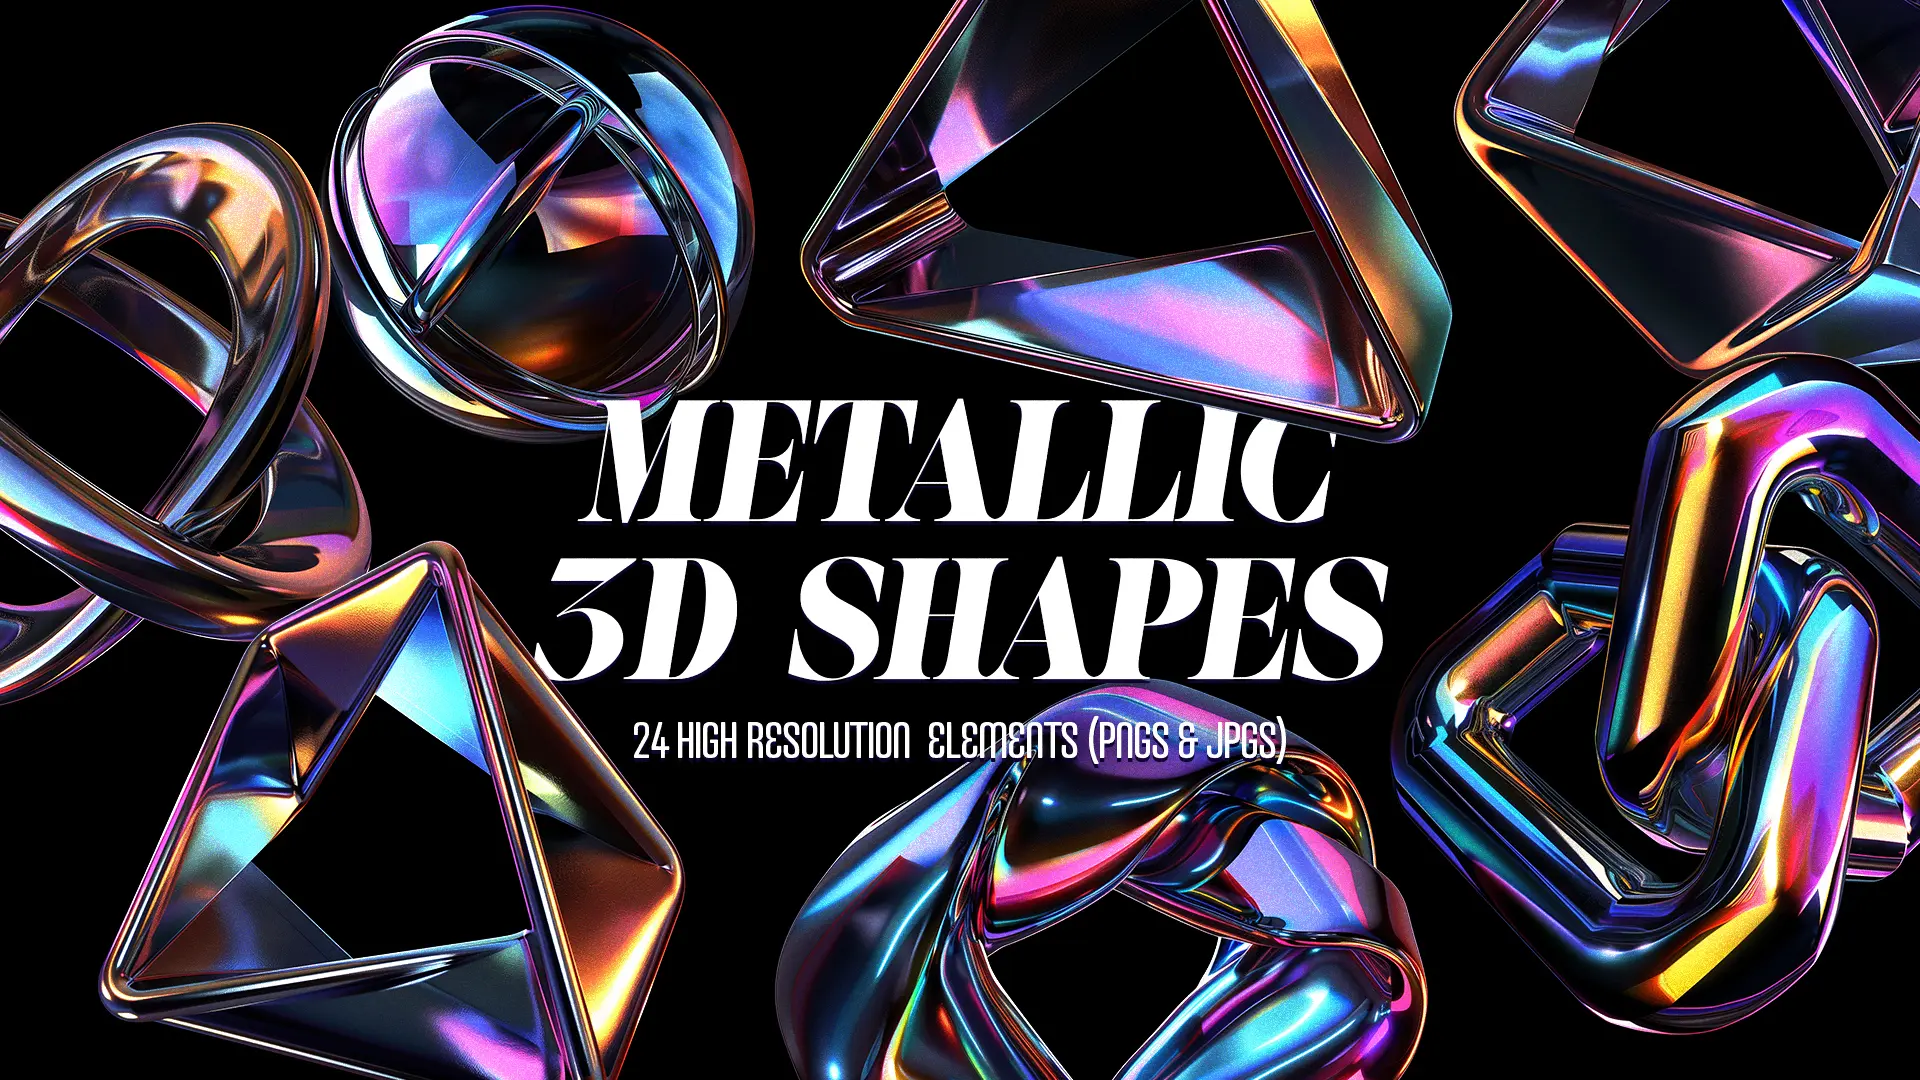 Metallic 3D Elements Cover | Remix Church Media | Editable Design Templates And Resources Made For The Church.